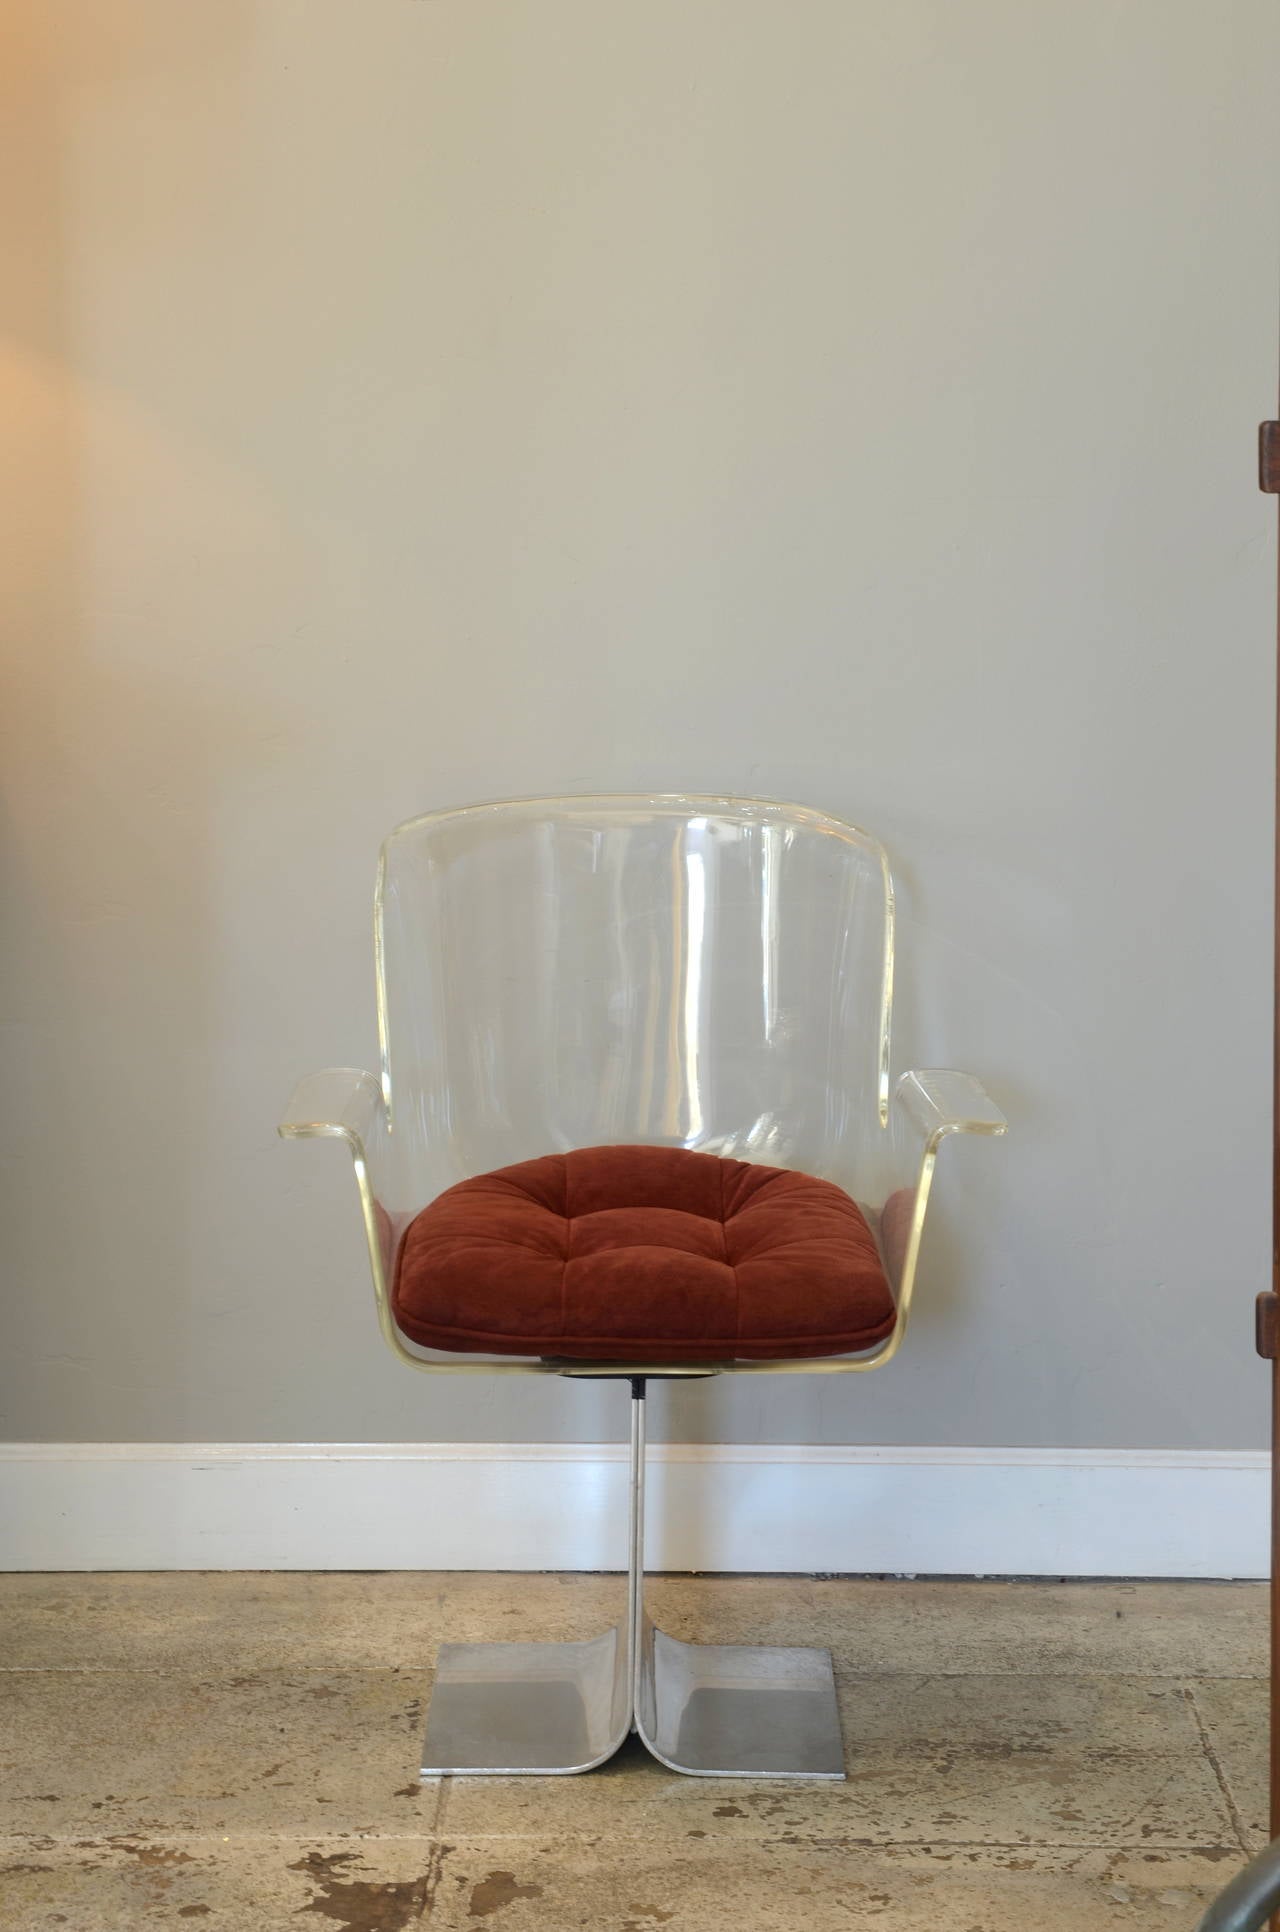 Swiveling Lucite and polished aluminum armchair by Irving Rosen for Pace Collection. Crimson velvet upholstered cushion.

Measures: Arm height 24.5